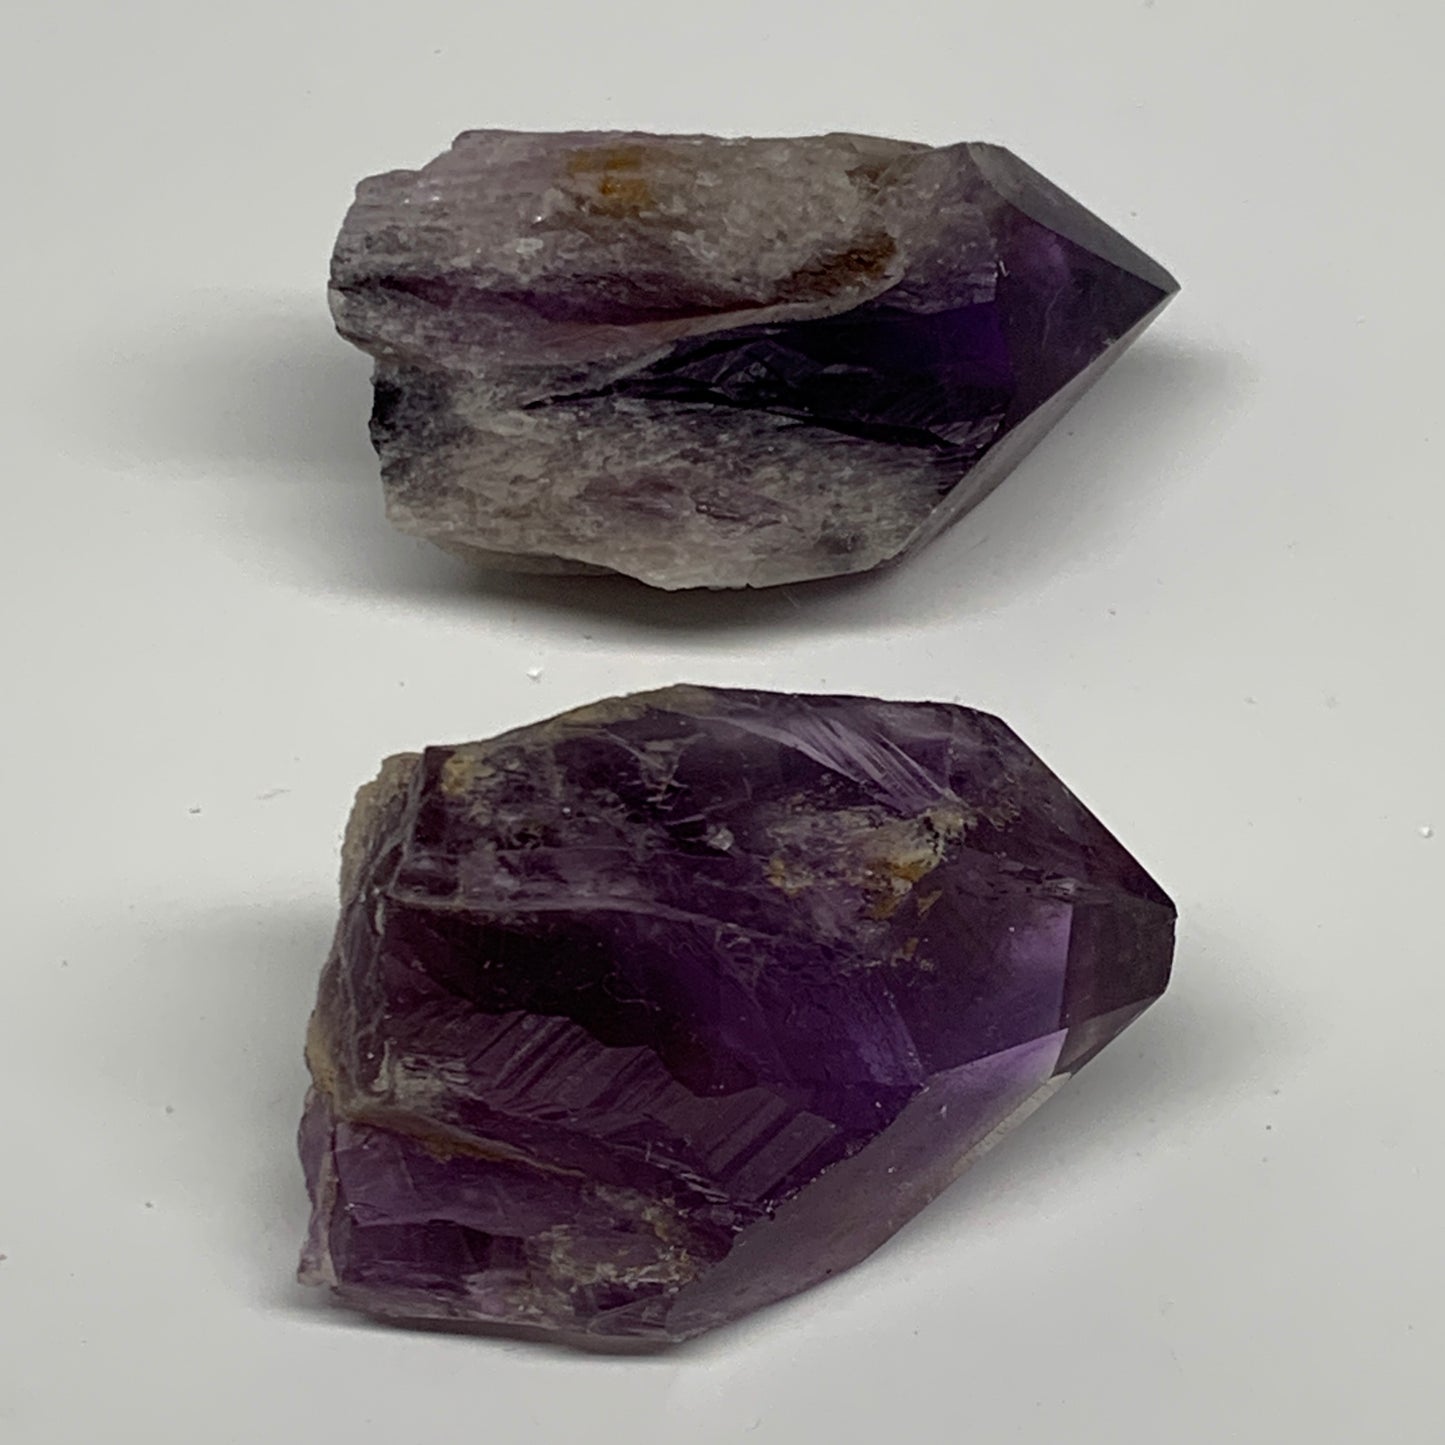 116.7g, 2" - 2.4", 2pcs, Amethyst Point Polished Rough lower part, B32397